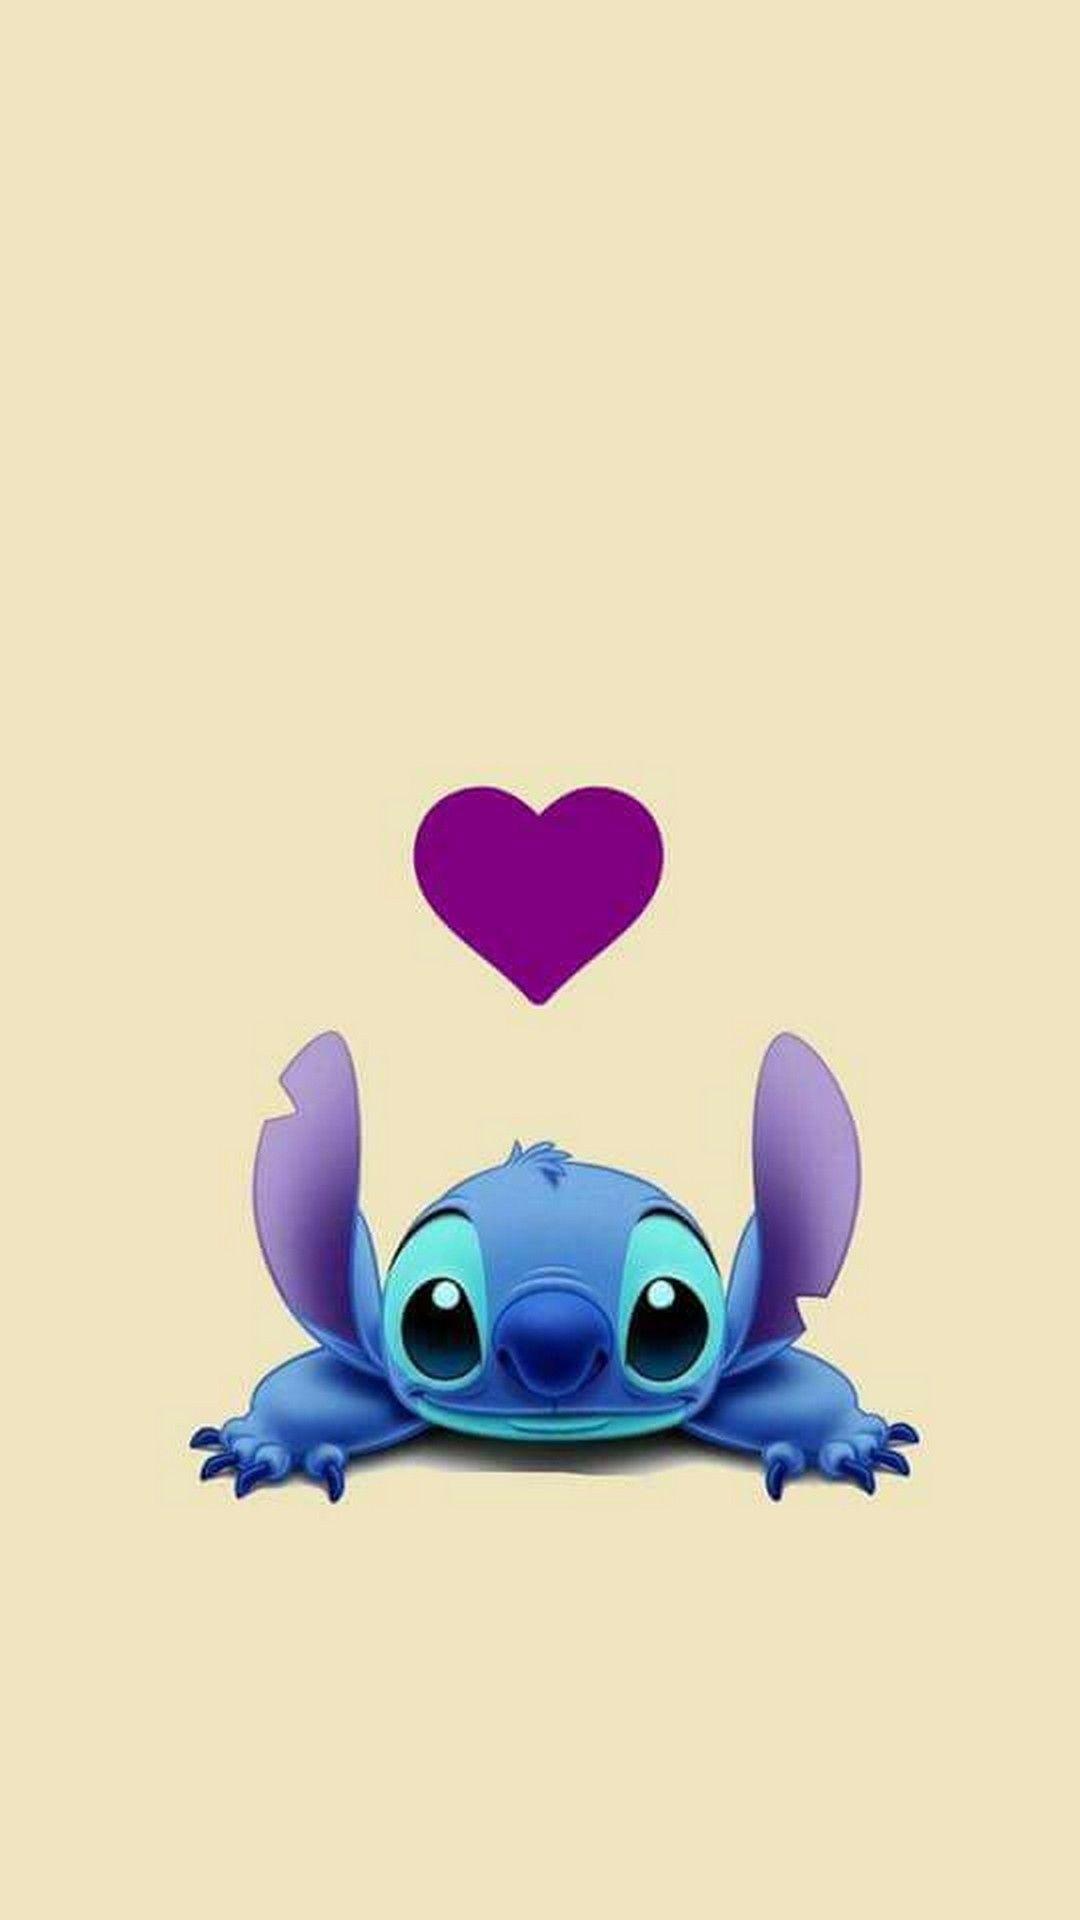 pics Cute Wallpapers For Ipad Stitch cute stitch iphone wallpapers top